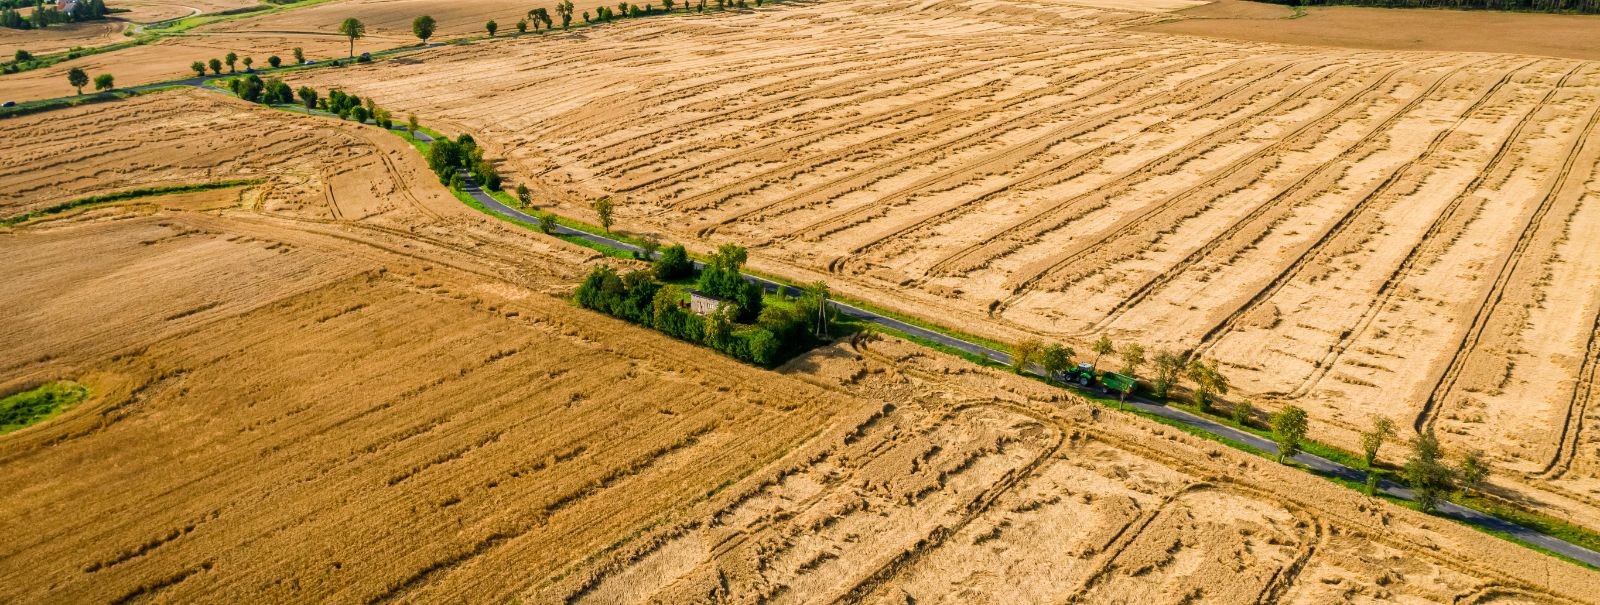 Understanding the value of your farmland is crucial whether you are considering selling, managing, or expanding your agricultural operations. The worth of farml